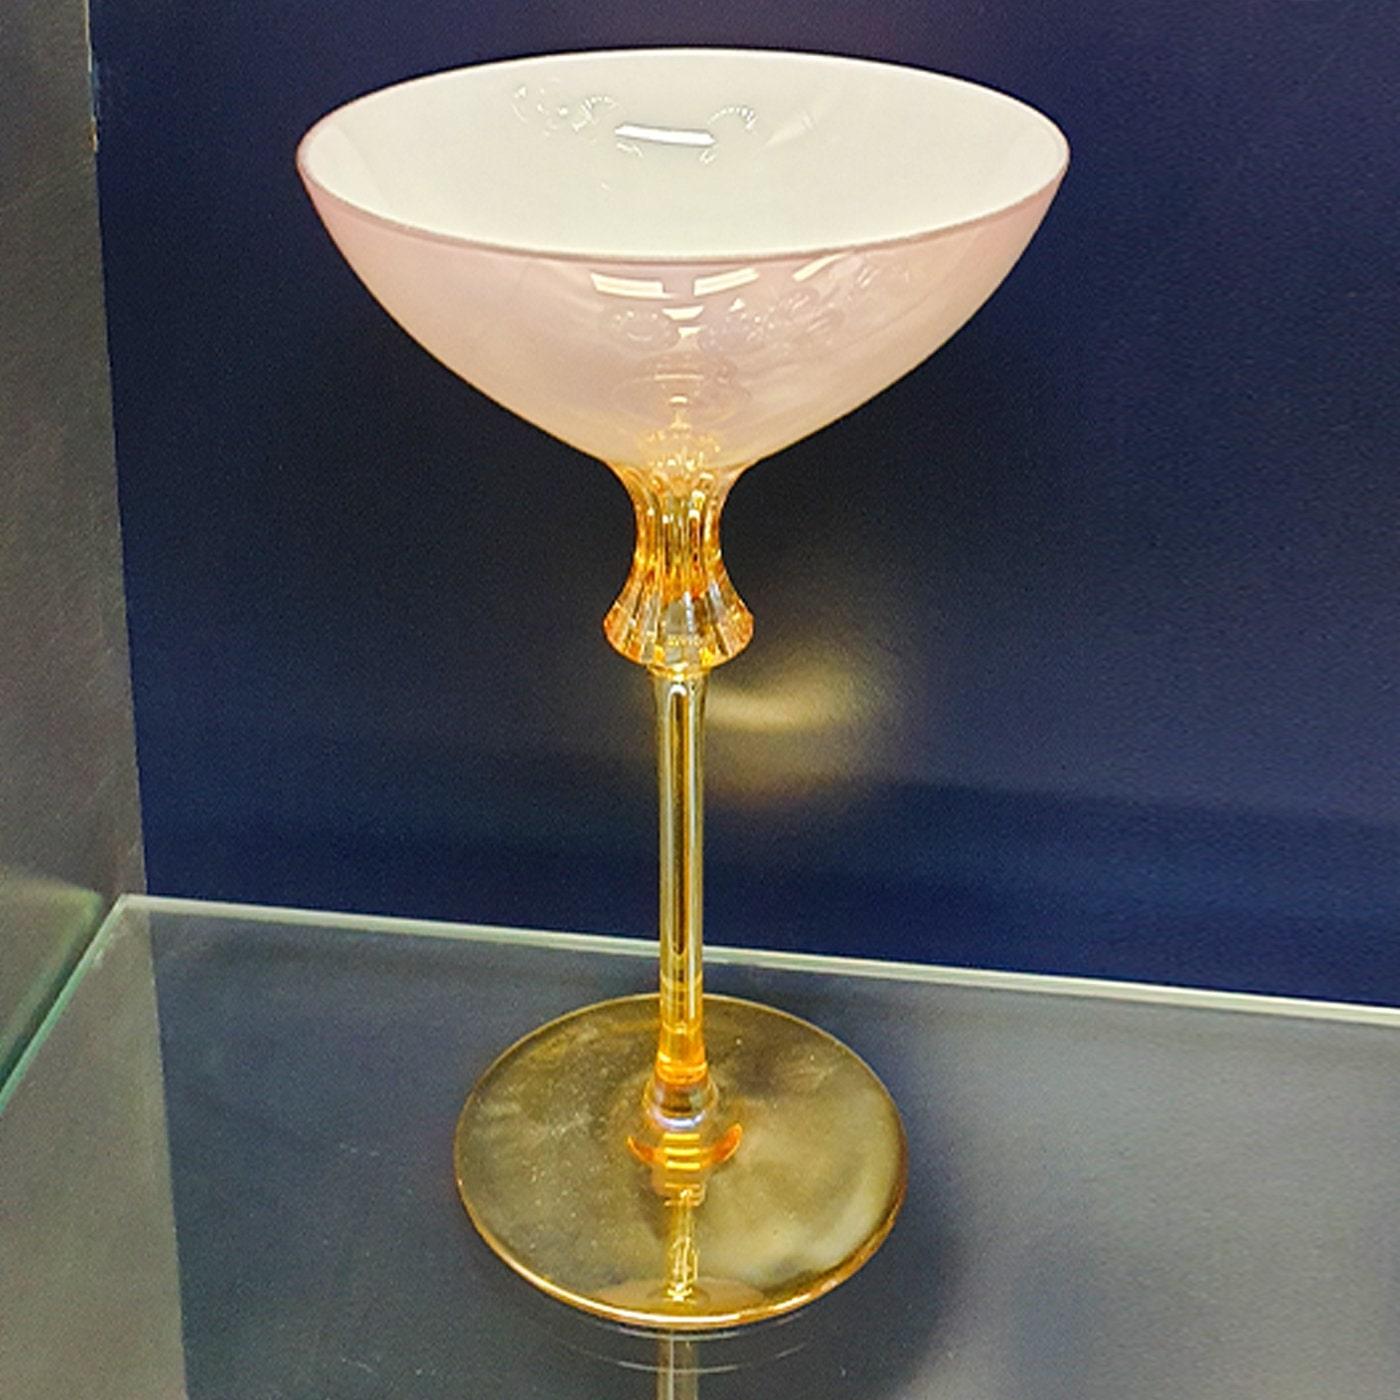 Traditional lines modern sophistication merge in this spectacular set of six champagne glasses, defined by a sublime combination of gold and pink in a stupendously polished design. Handcrafted of crystal and decorated by hand, each piece features a